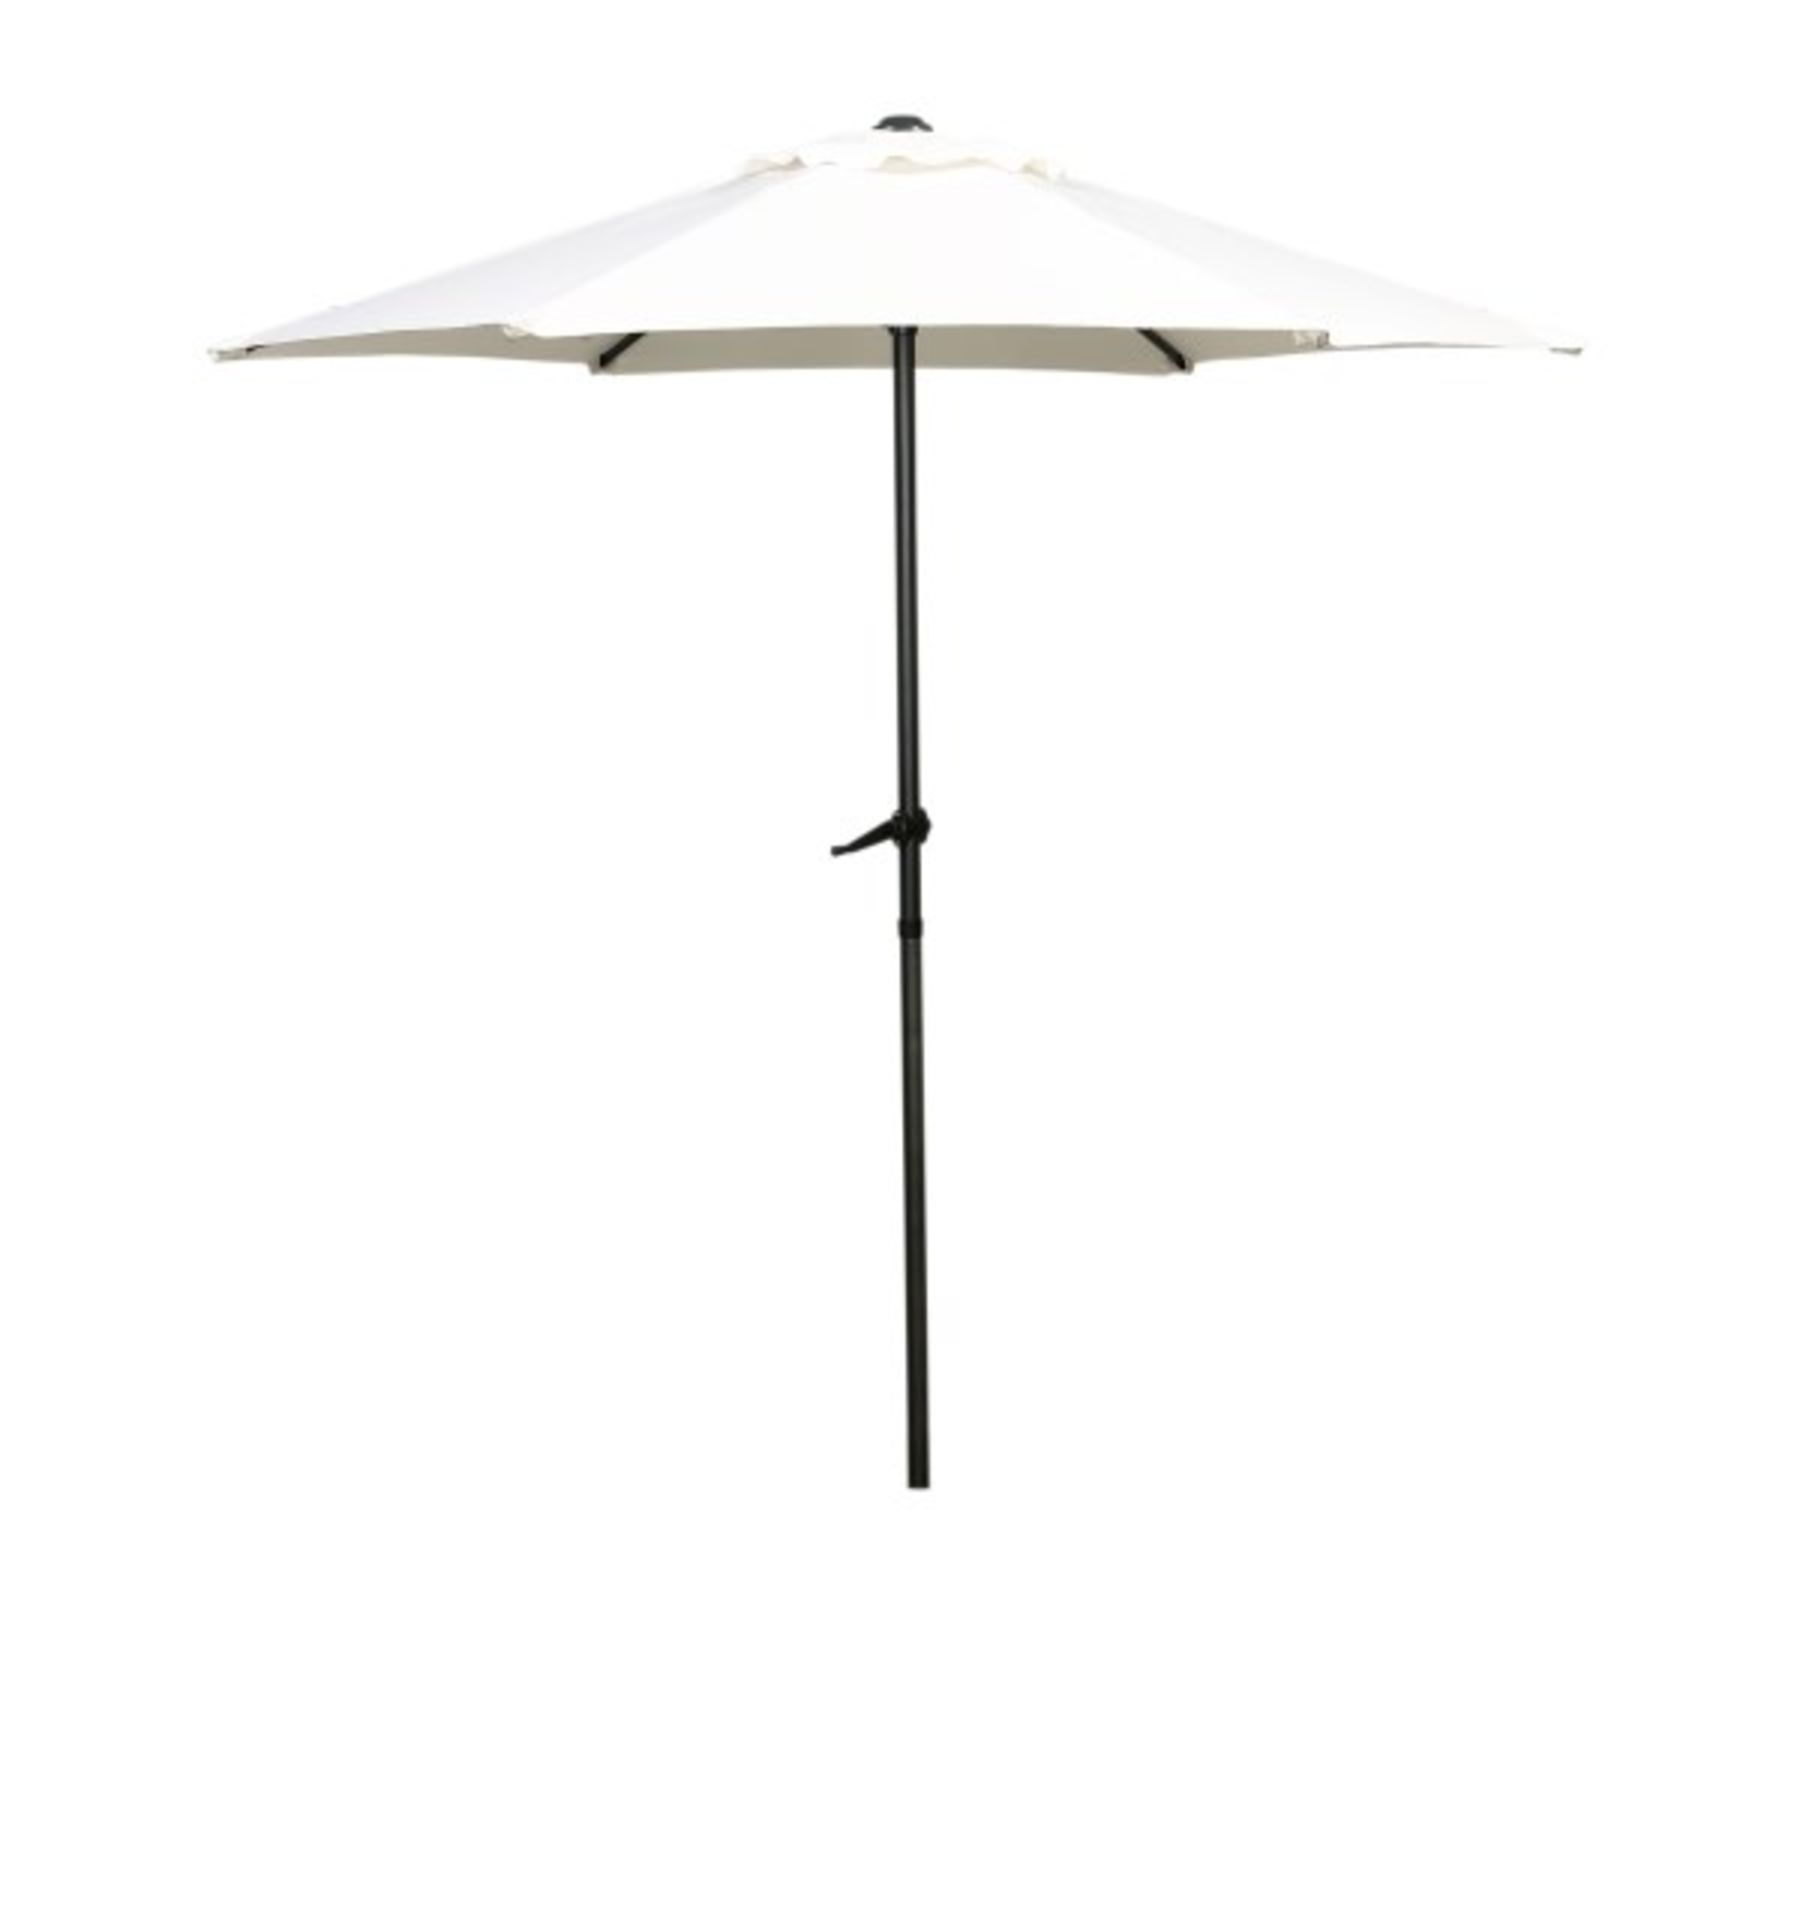 V Brand New Ivory 3m Parasol Stainless Steel Look Aluminium Crank & TIlt X 2 YOUR BID PRICE TO BE